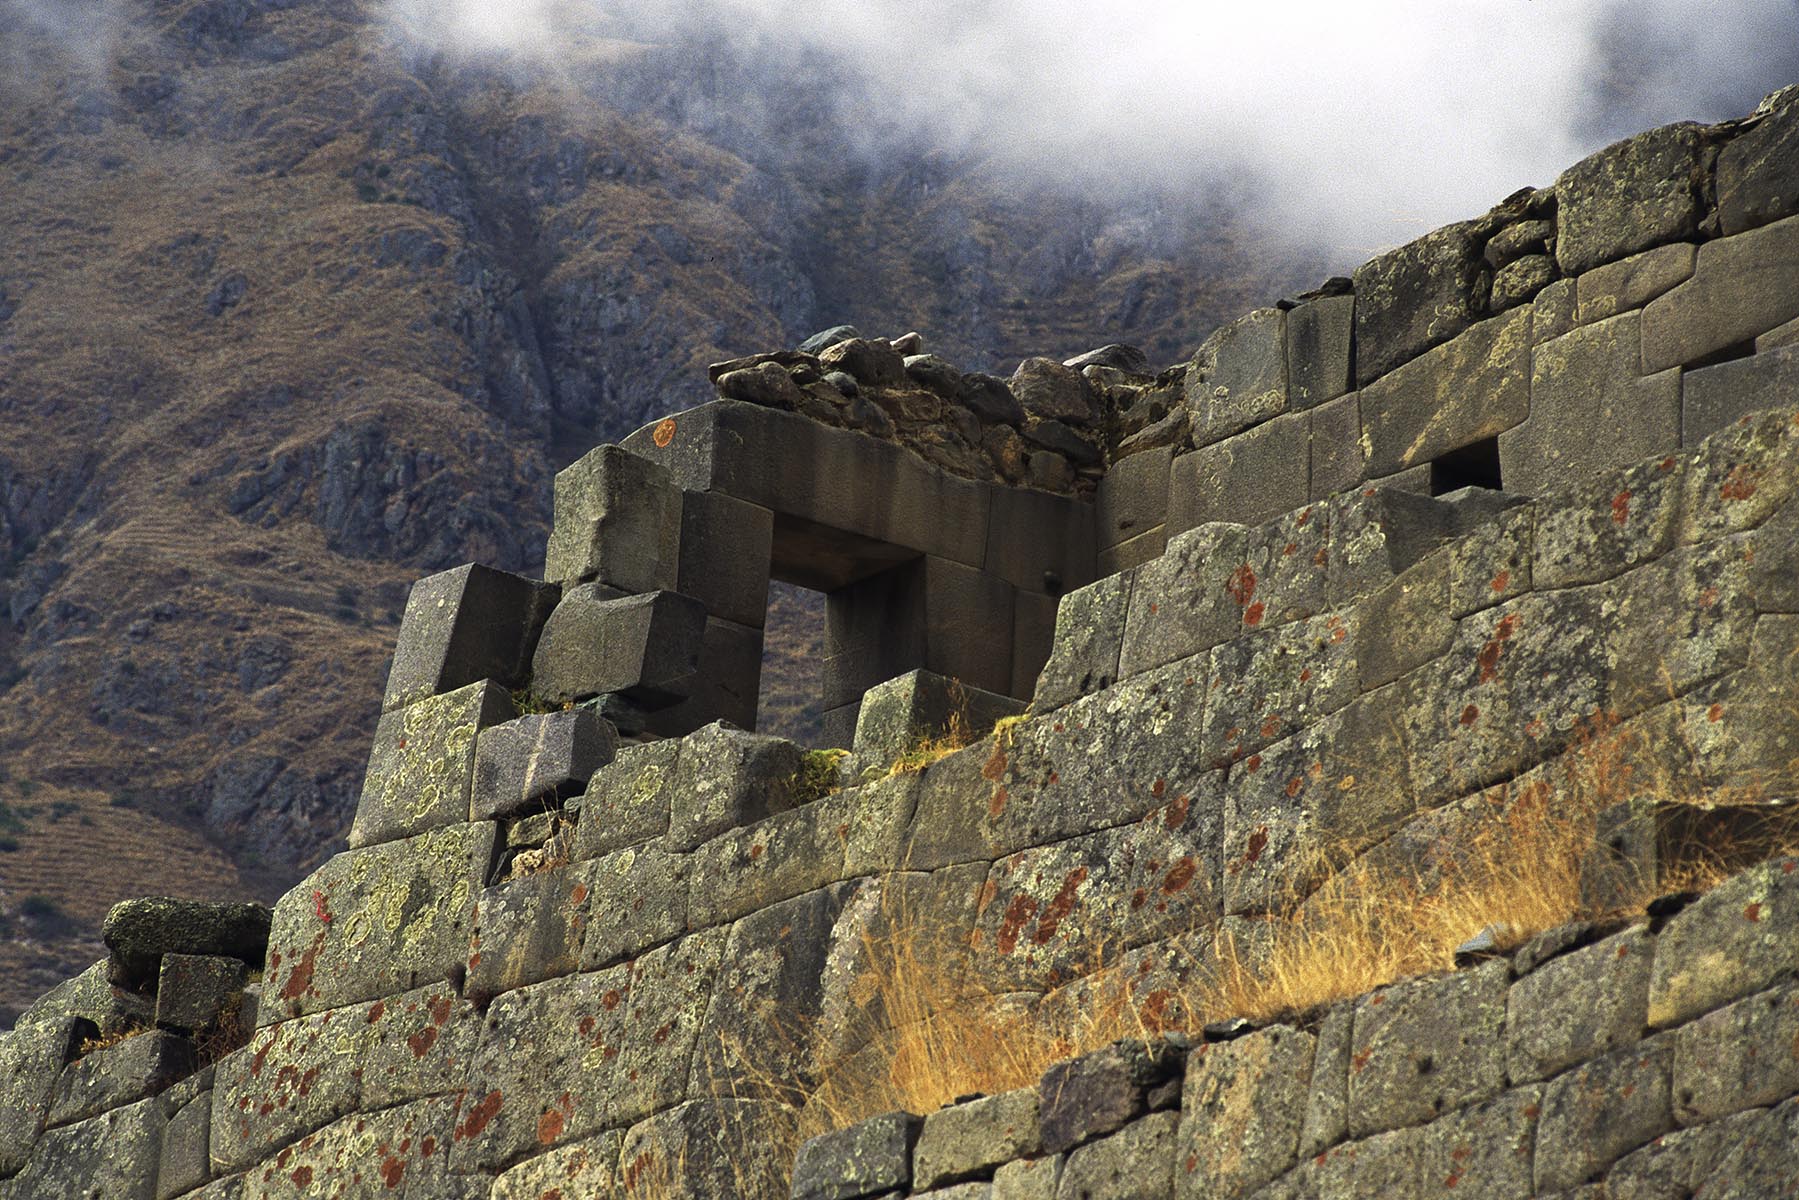 Beautiful doorway of the TERRACE OF THE 10 NICHES in the INCA ruins of OLLANTAYTAMBO - SACRED VALLEY, PERU